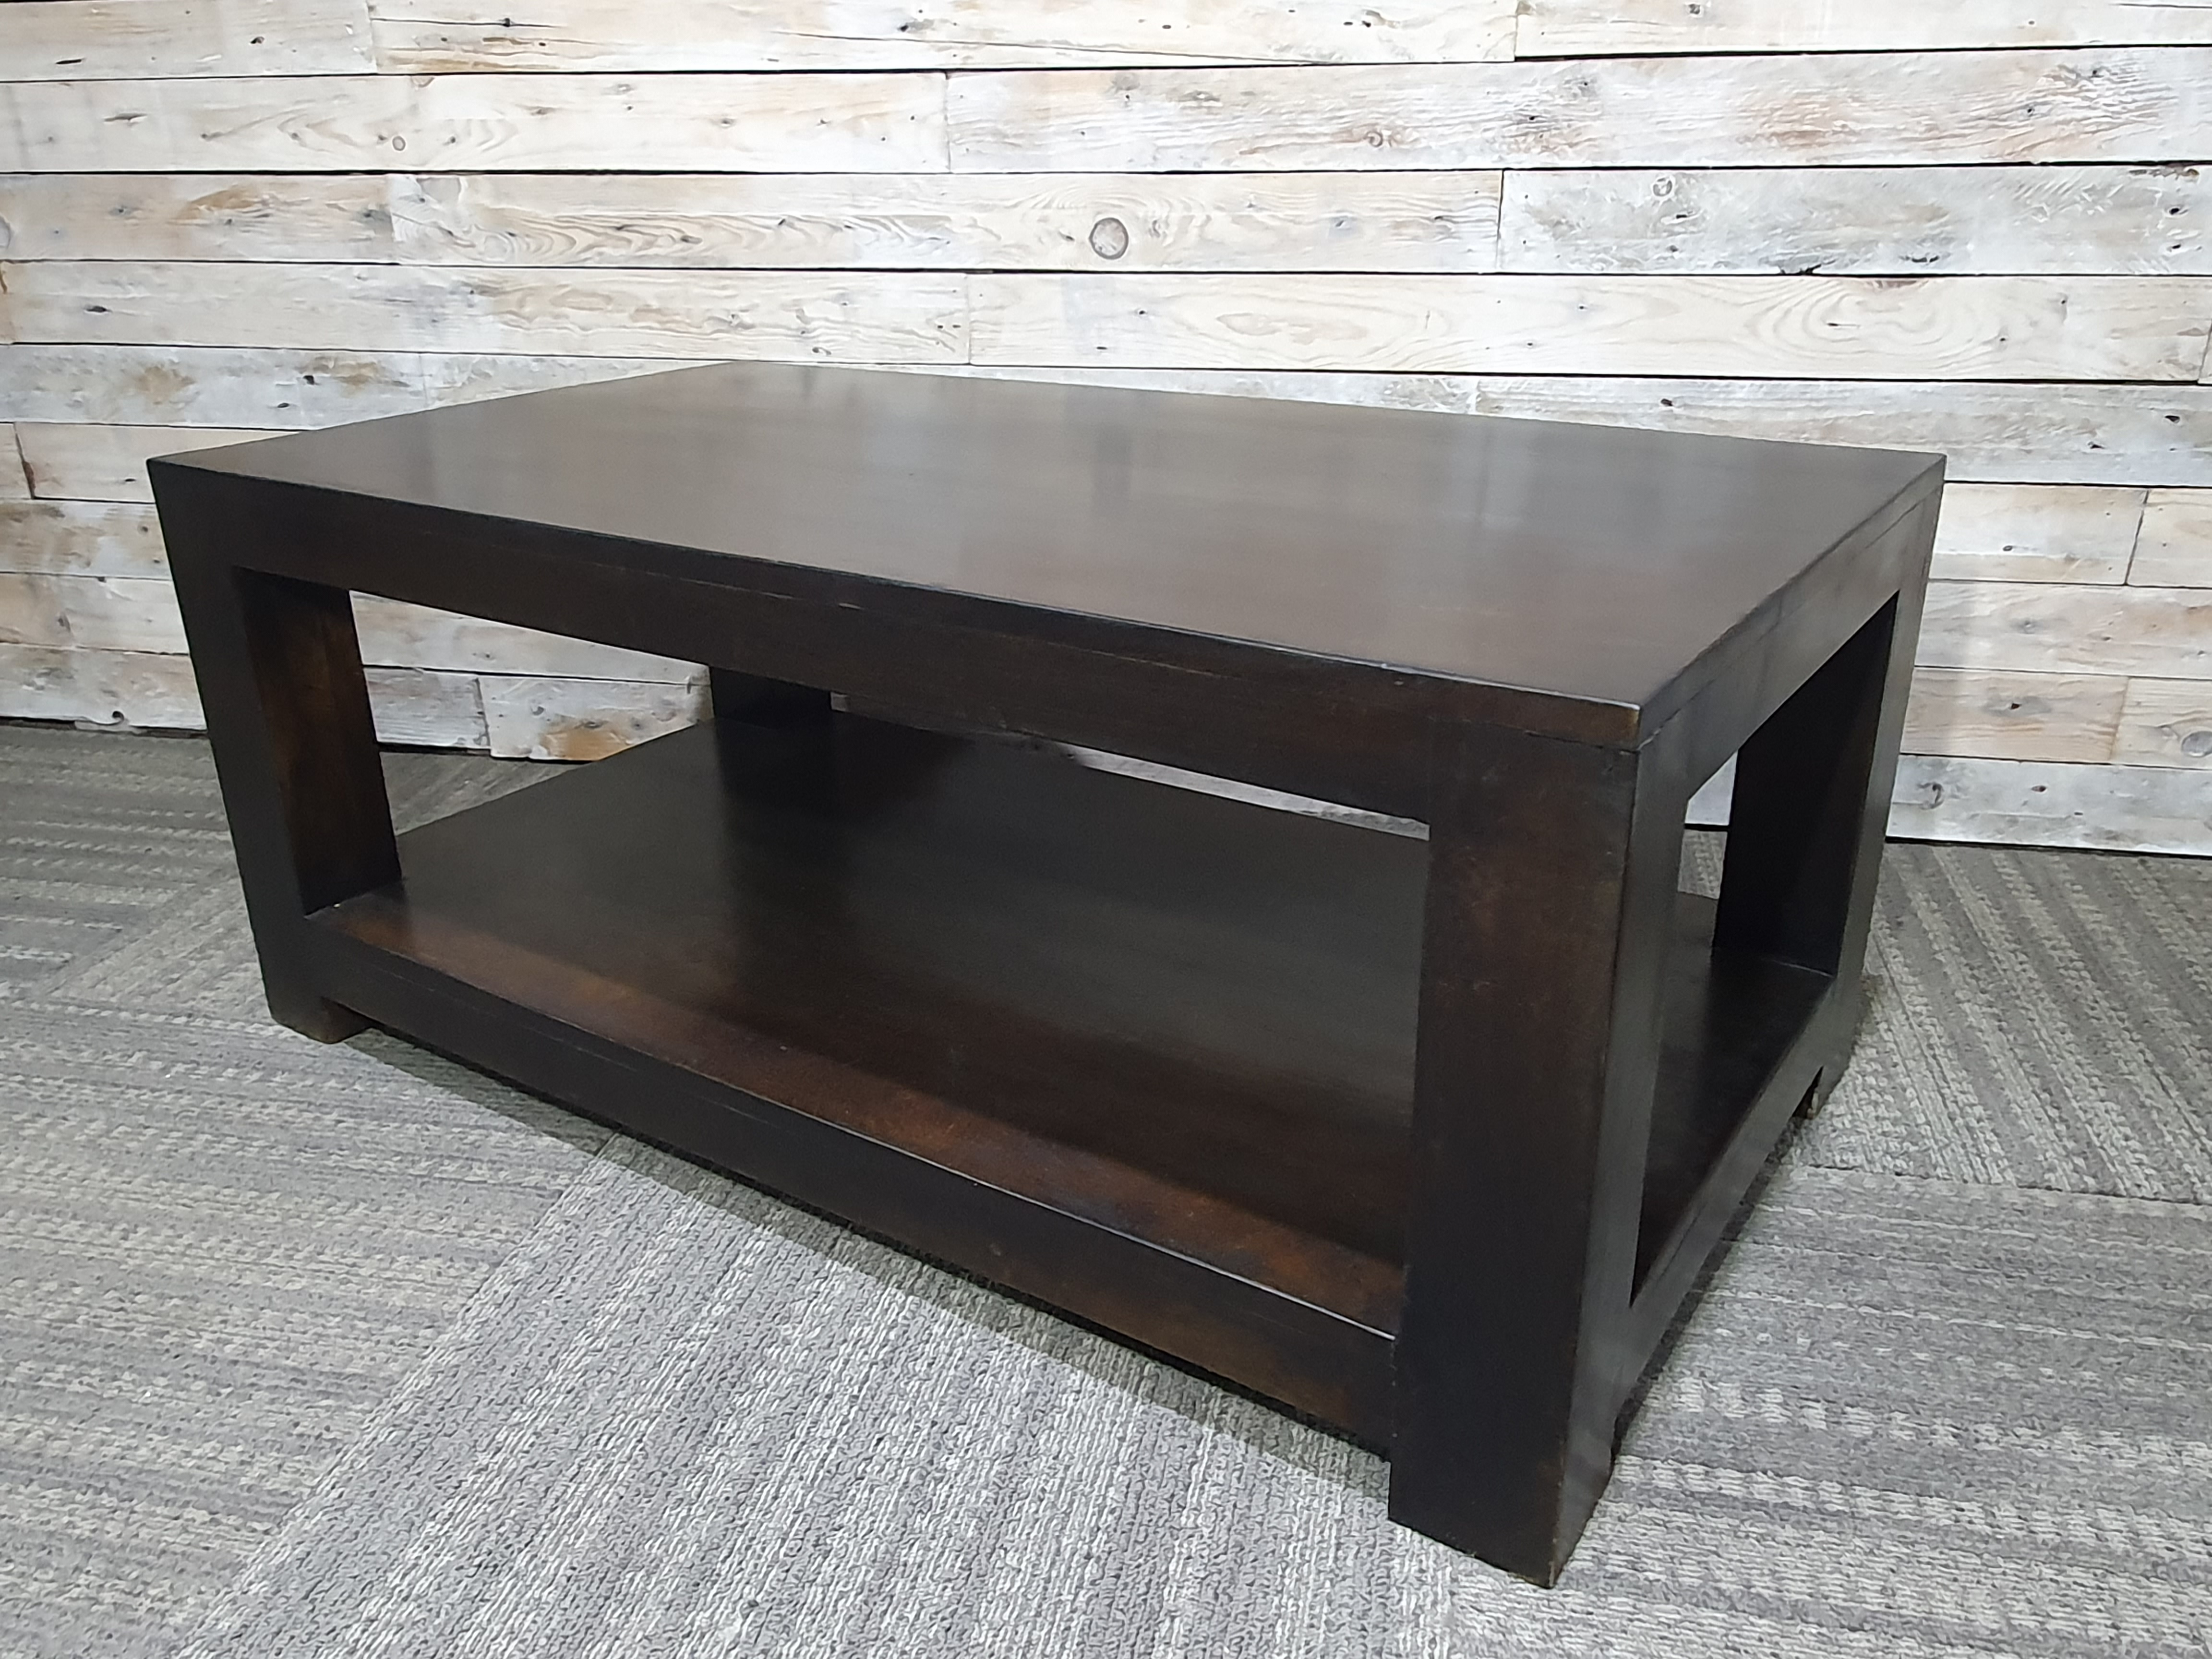 Solid Wooden Ebonised Black Coffee Centre Table 110cm x 60cm x 46cm Tall. Rrp £399